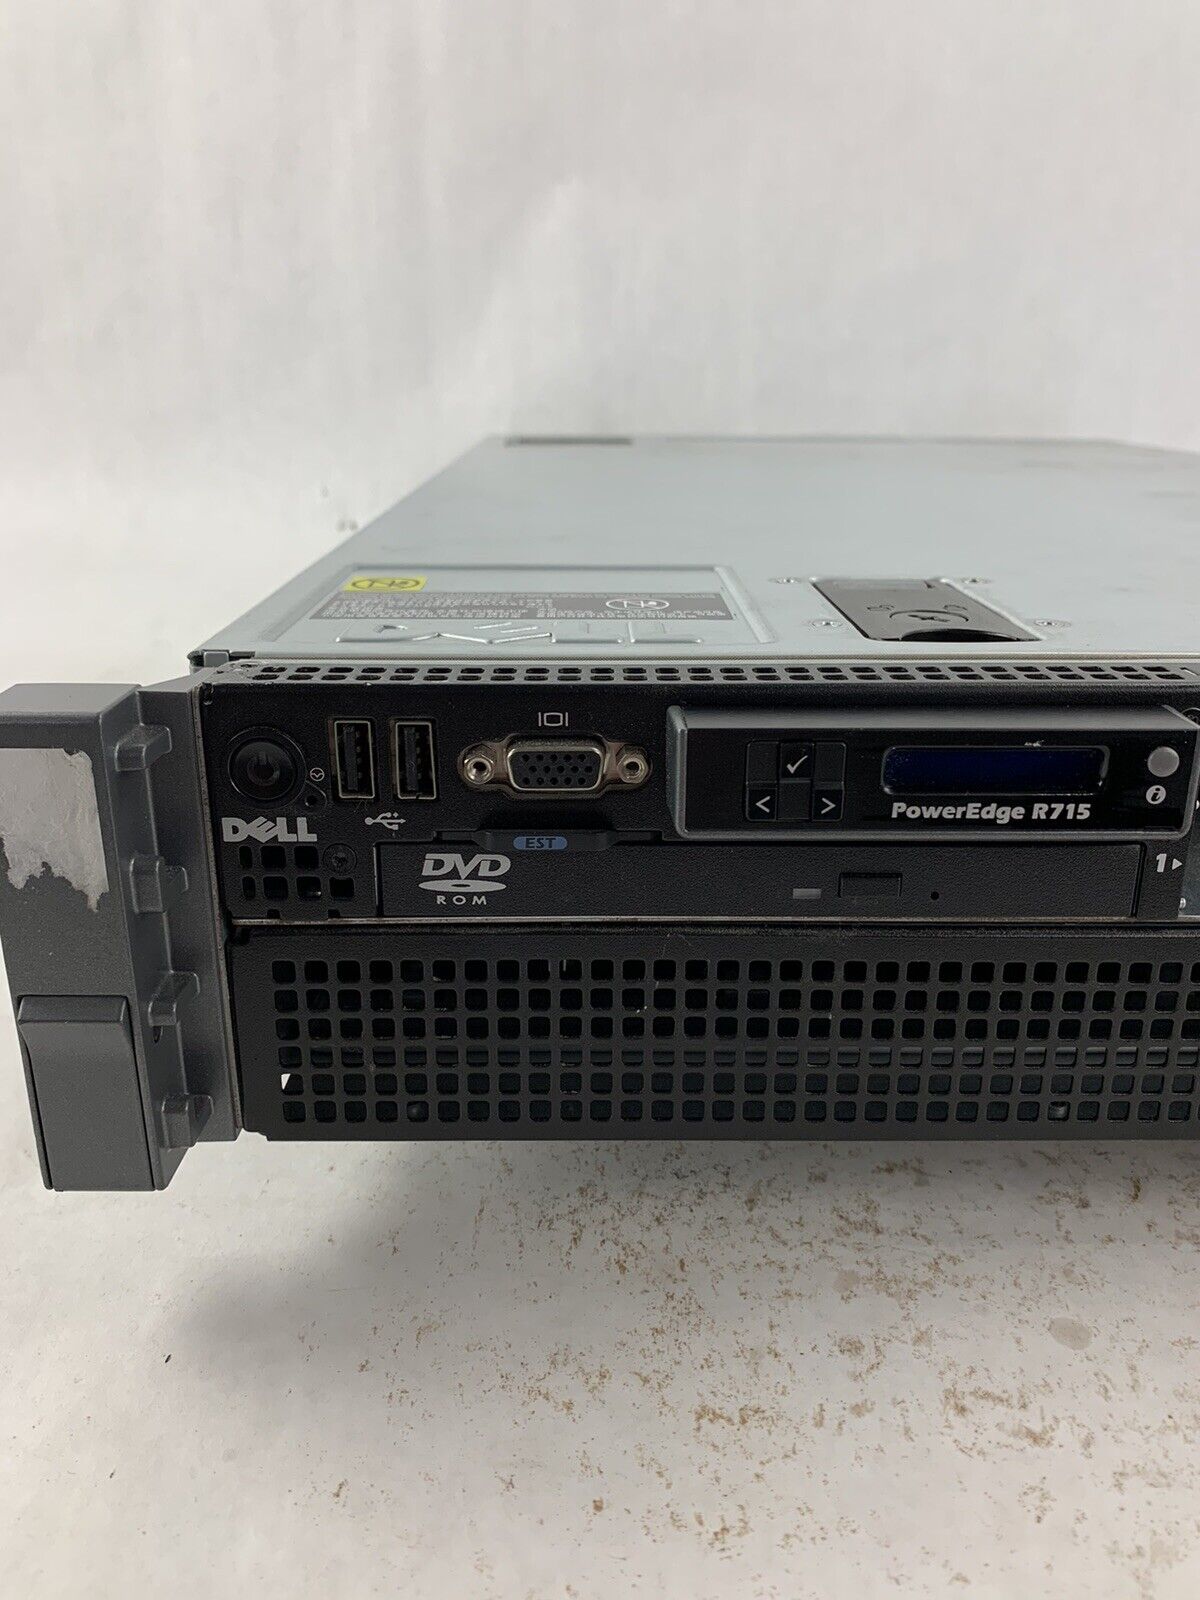 Poweredge R715,  2 Opteron 6172, 2.1 GHz,  64Gb RAM, TESTED